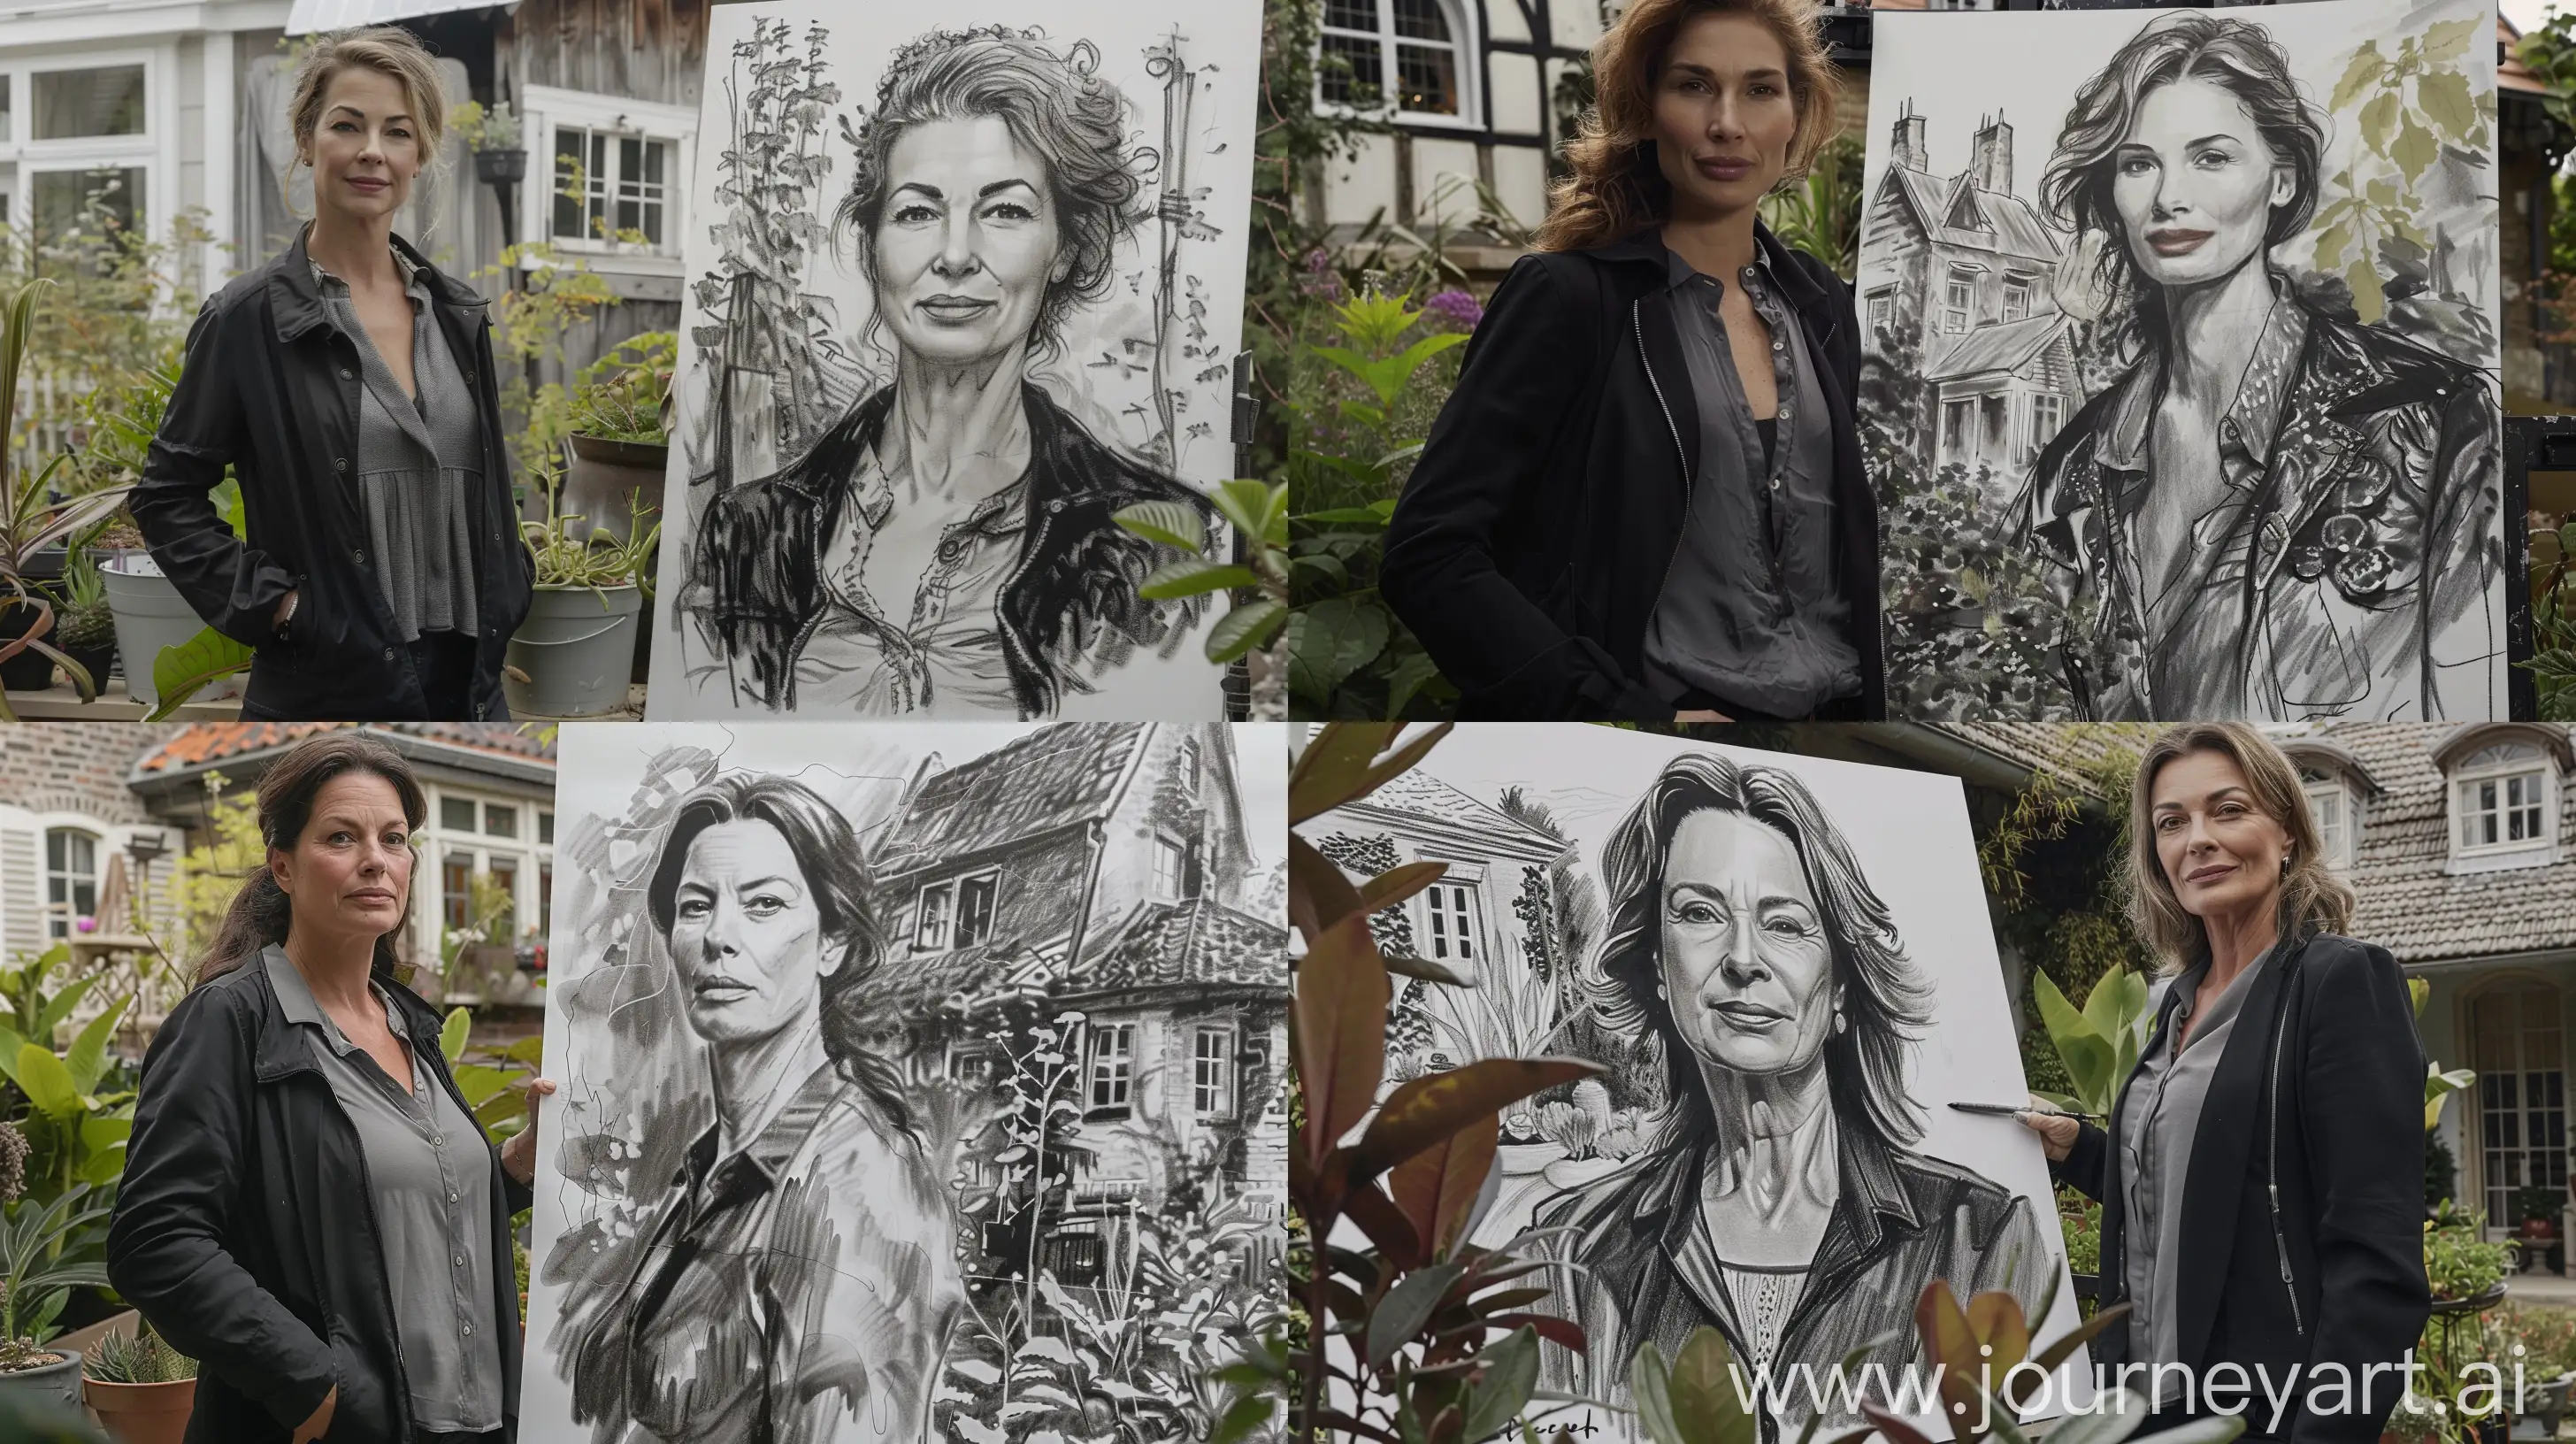 A beautiful woman in her forties wearing a black jacket and a gray blouse, stands next to a large black and white sketch of a woman in her forties, with plants and an old house behind her, The background is an old house in the countryside --ar 16:9